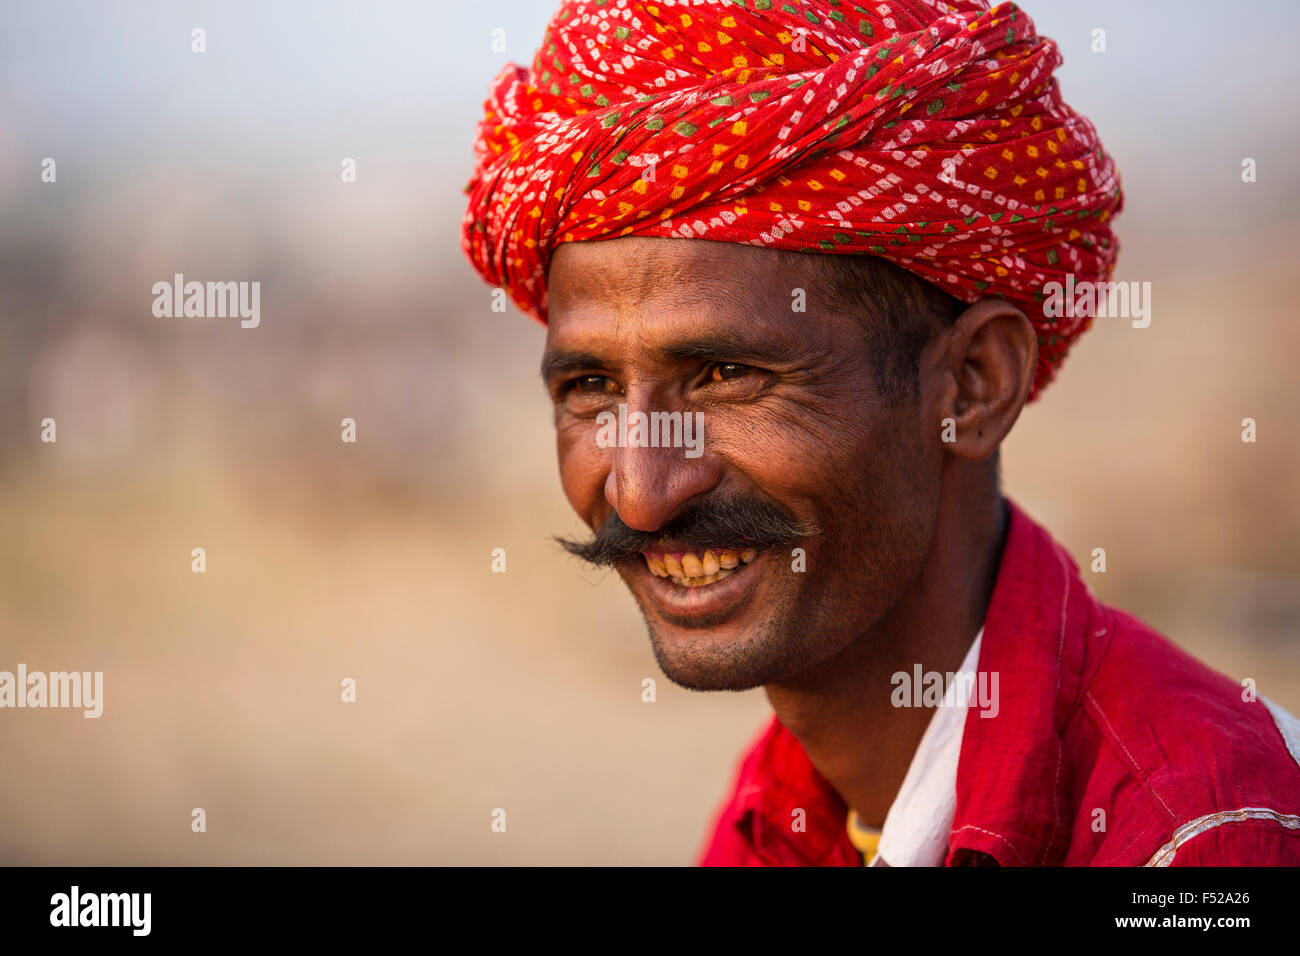 moustached man from Rajasthan with red headscarf, Pushkar, Stock Photo